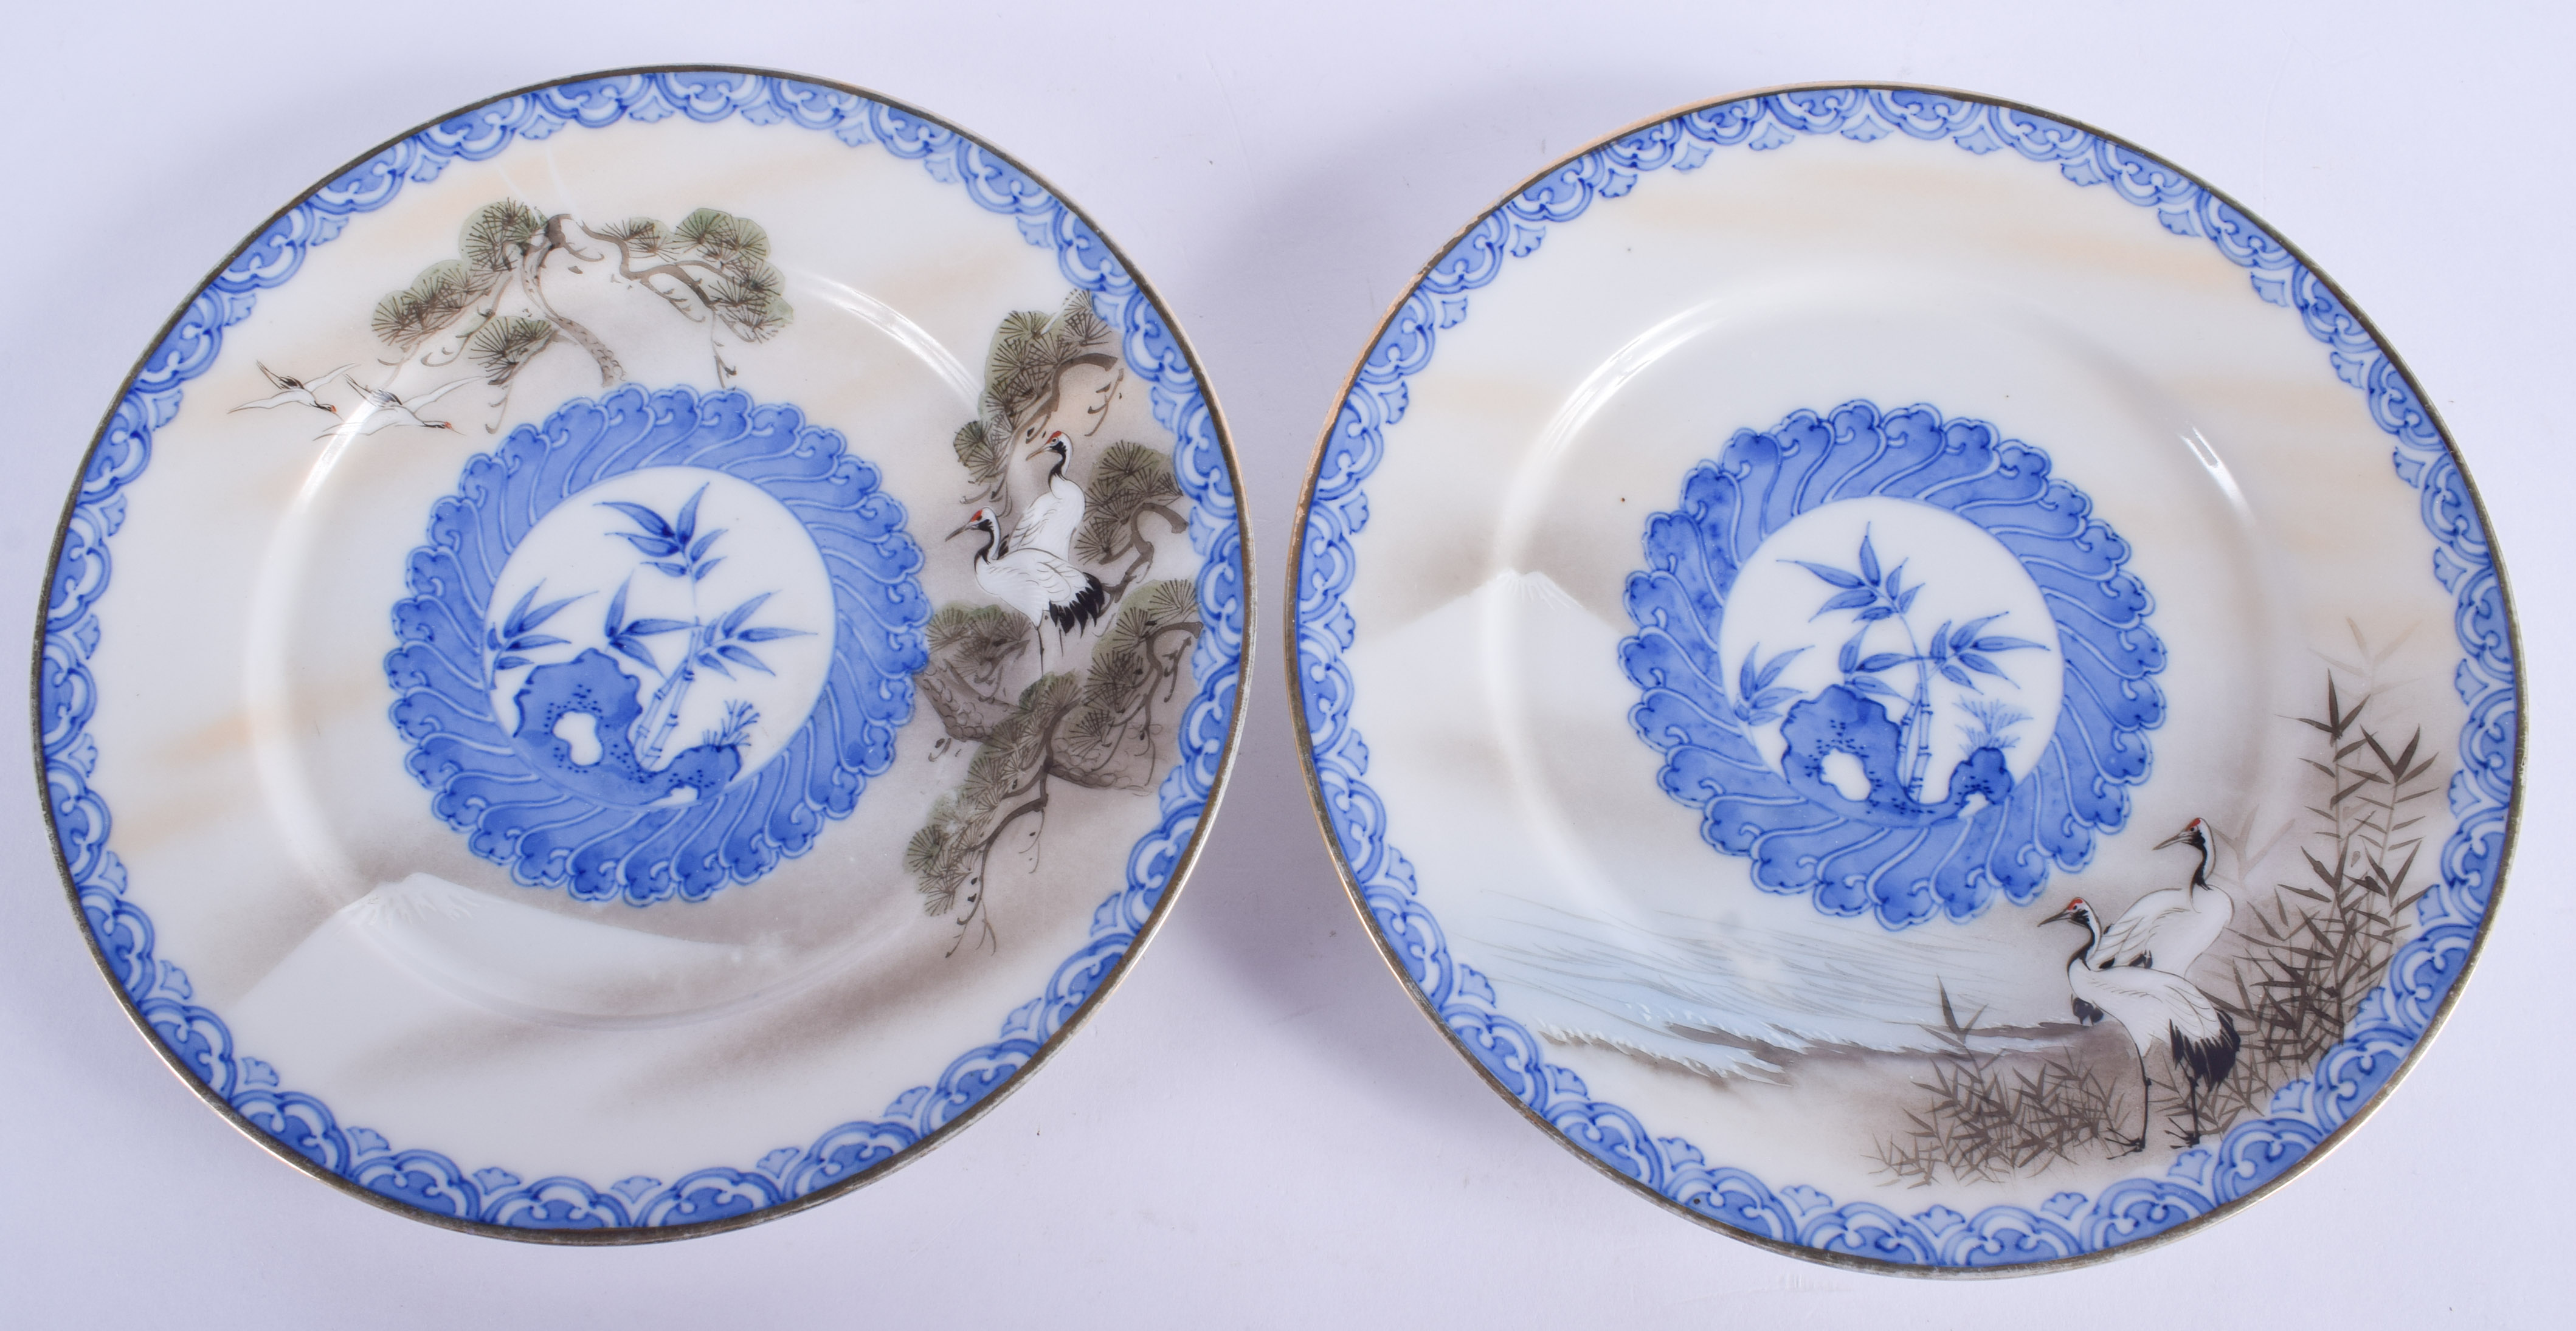 A PAIR OF EARLY 20TH CENTURY JAPANESE MEIJI PERIOD KUTANI PLATES painted with cranes. 18.5 cm wide.